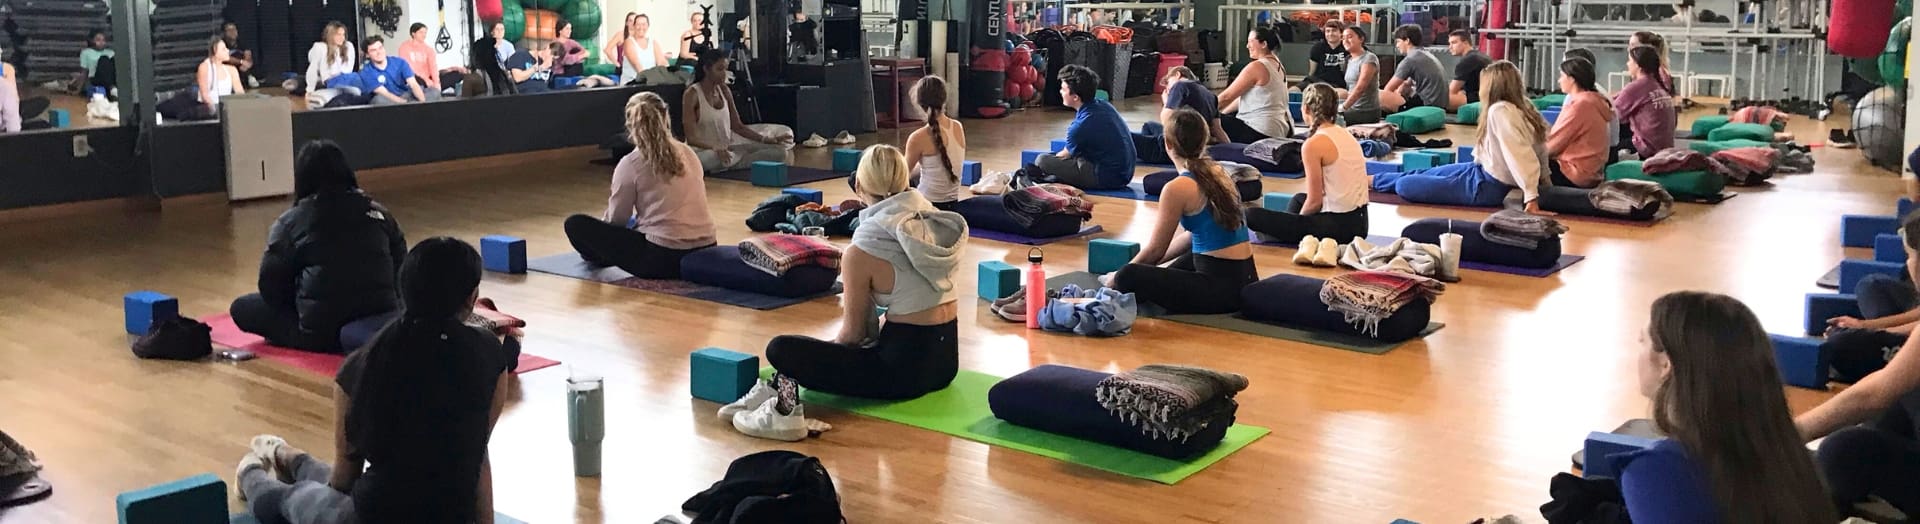 gym members sit during a yoga class at inlet fitness in virginia beach